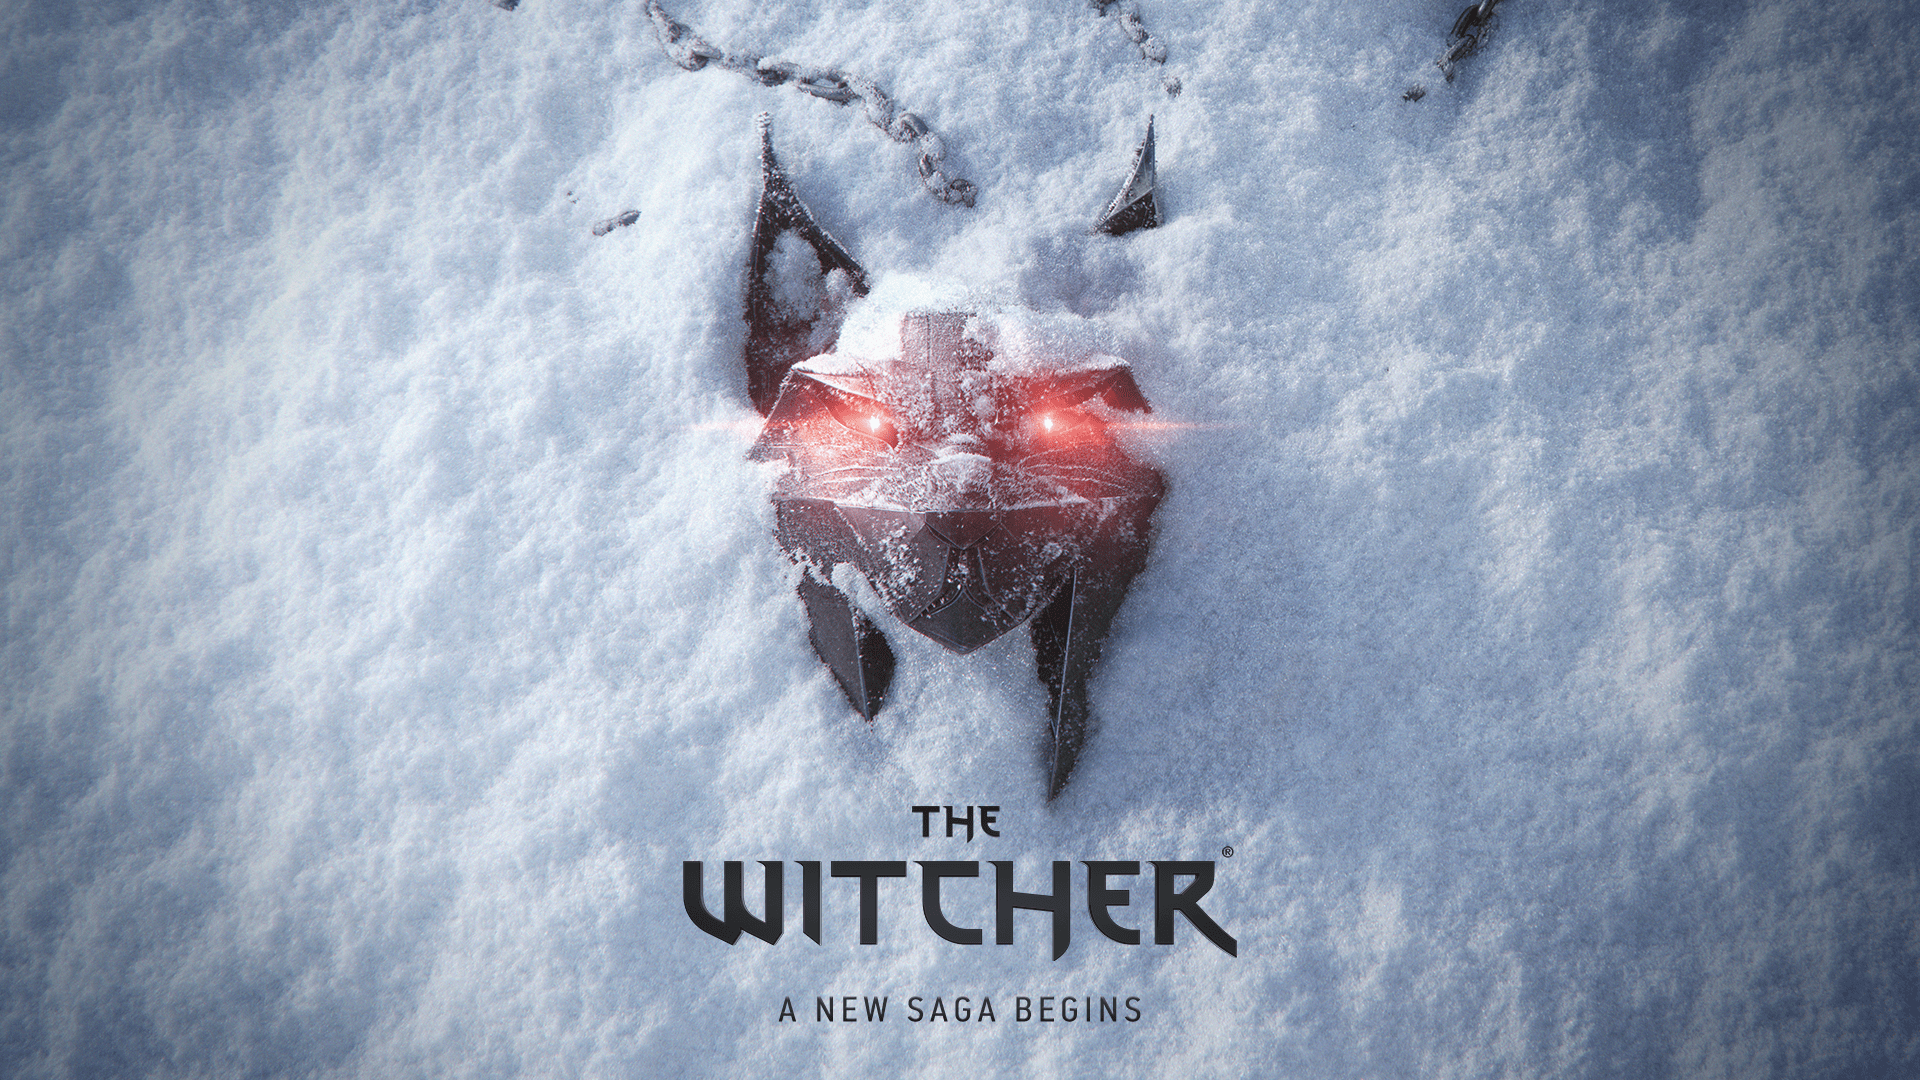 The Next Witcher Game Announced